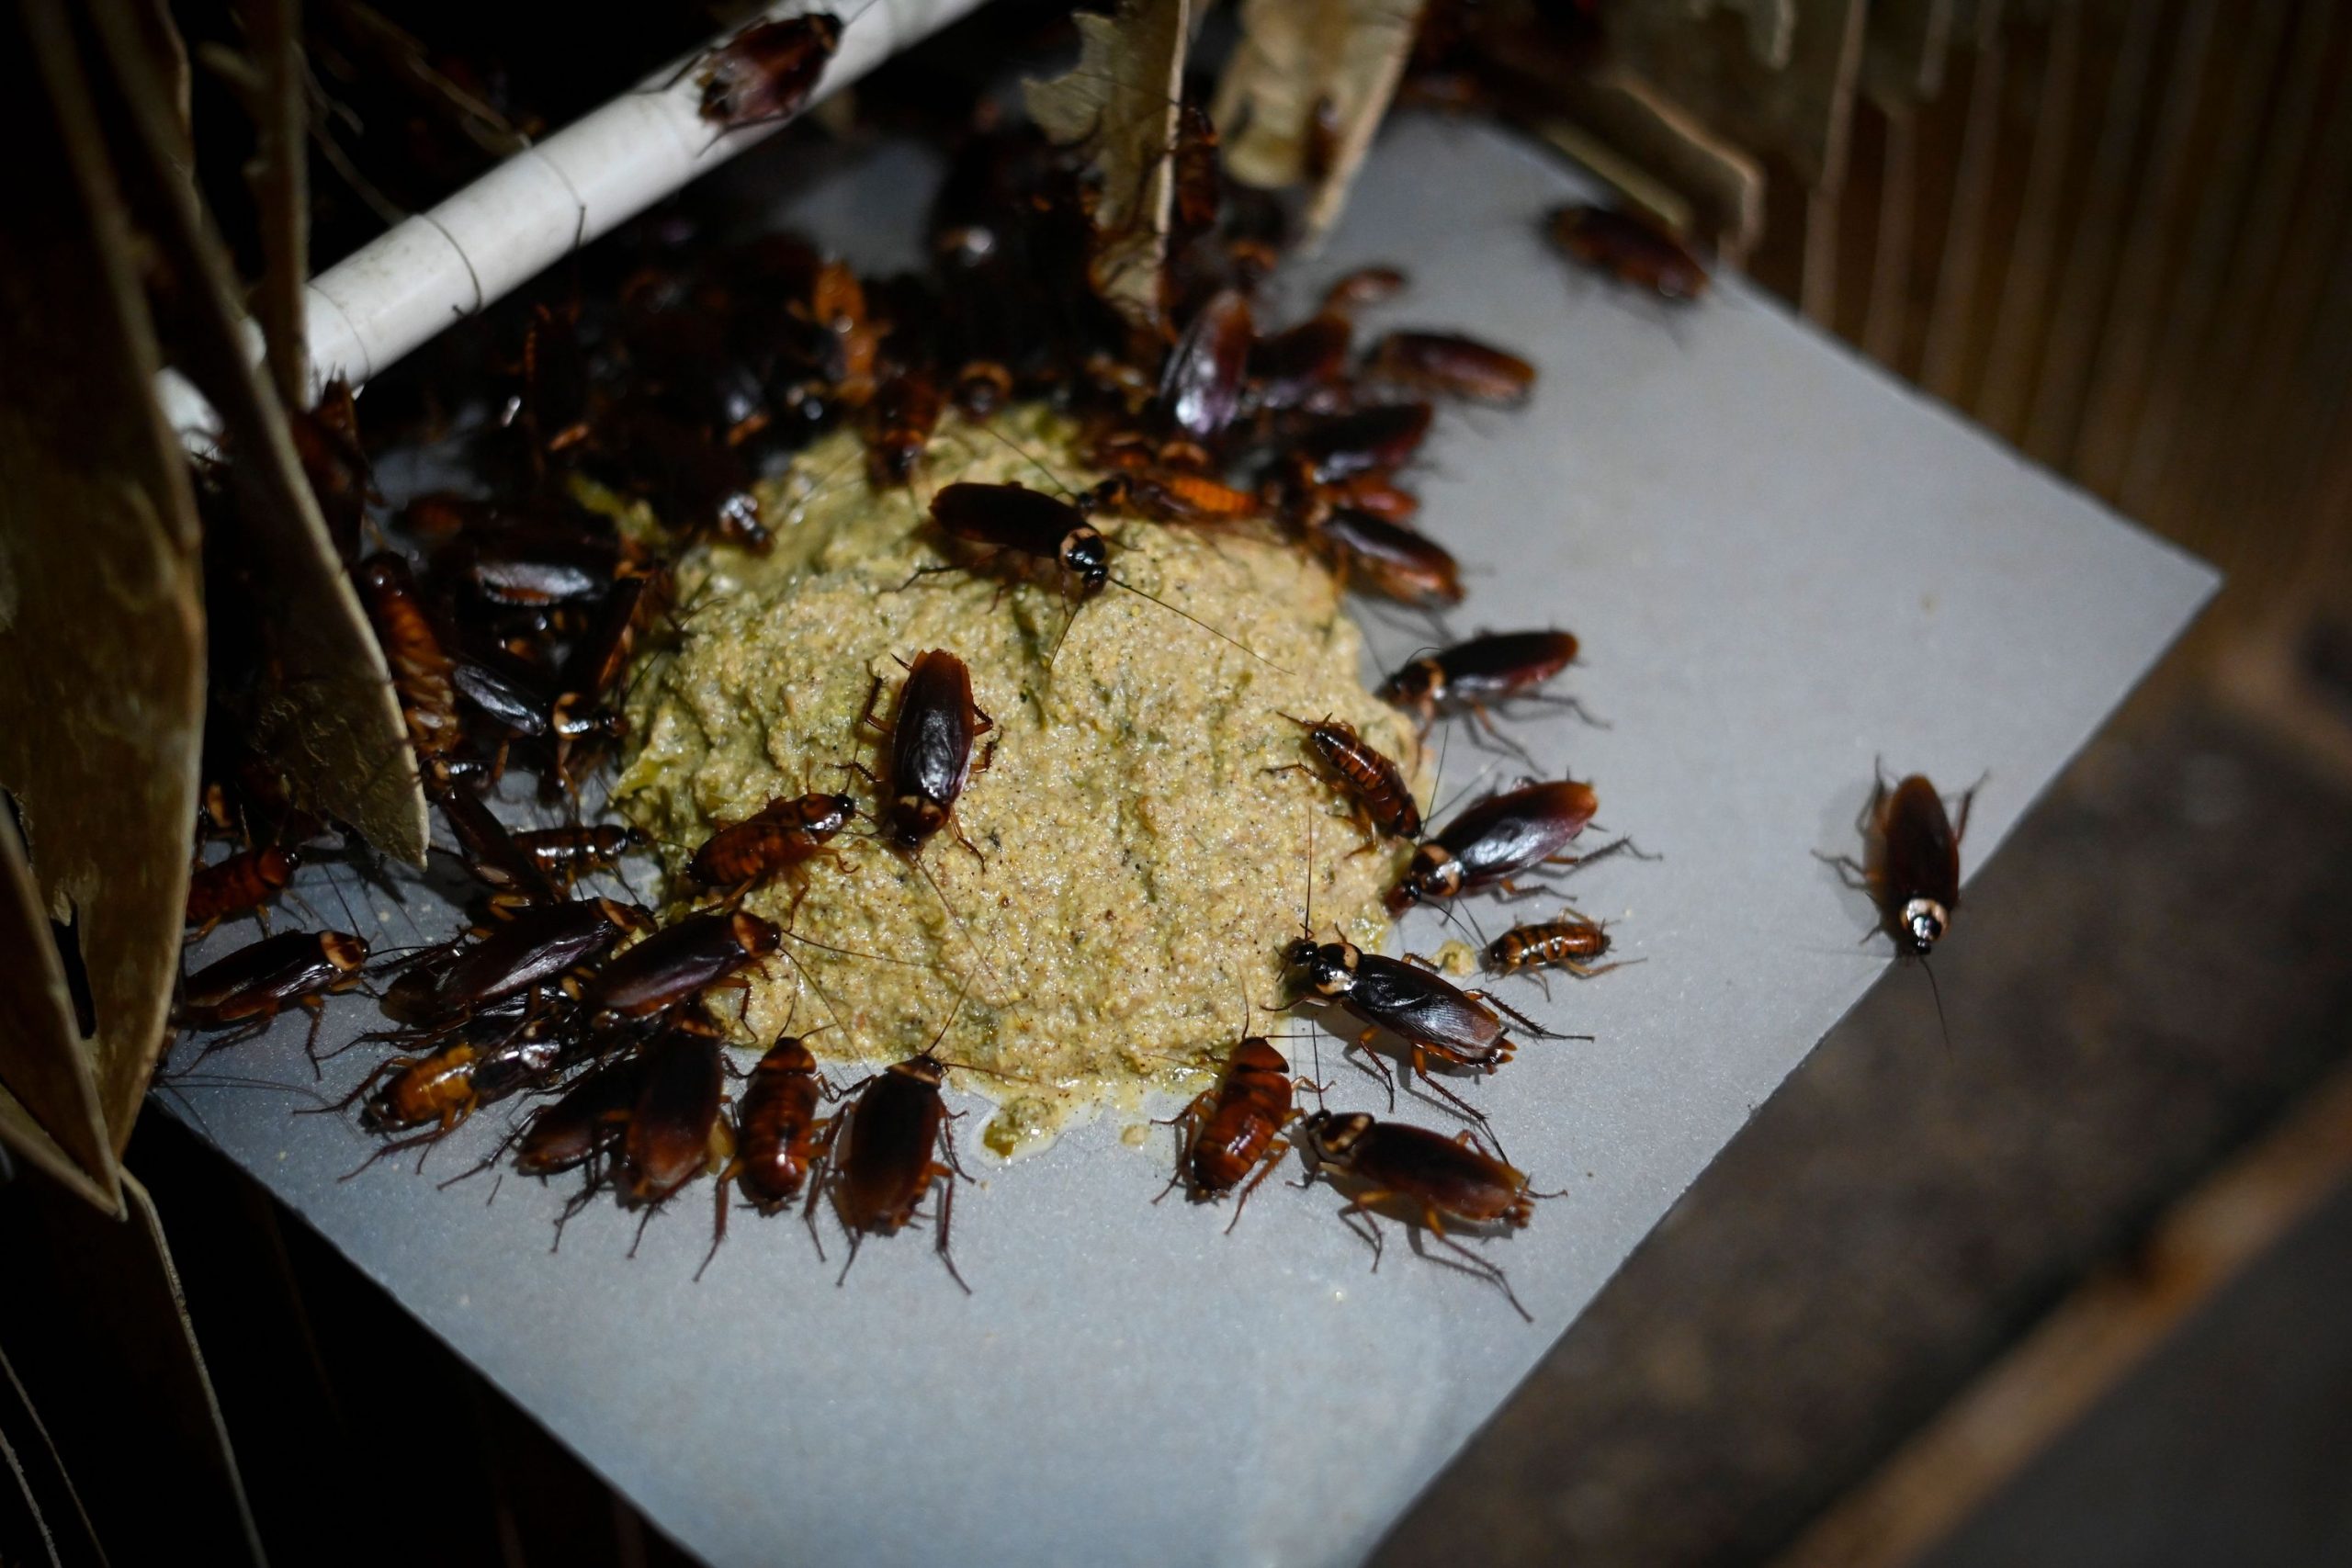 a pile of roaches eating feed